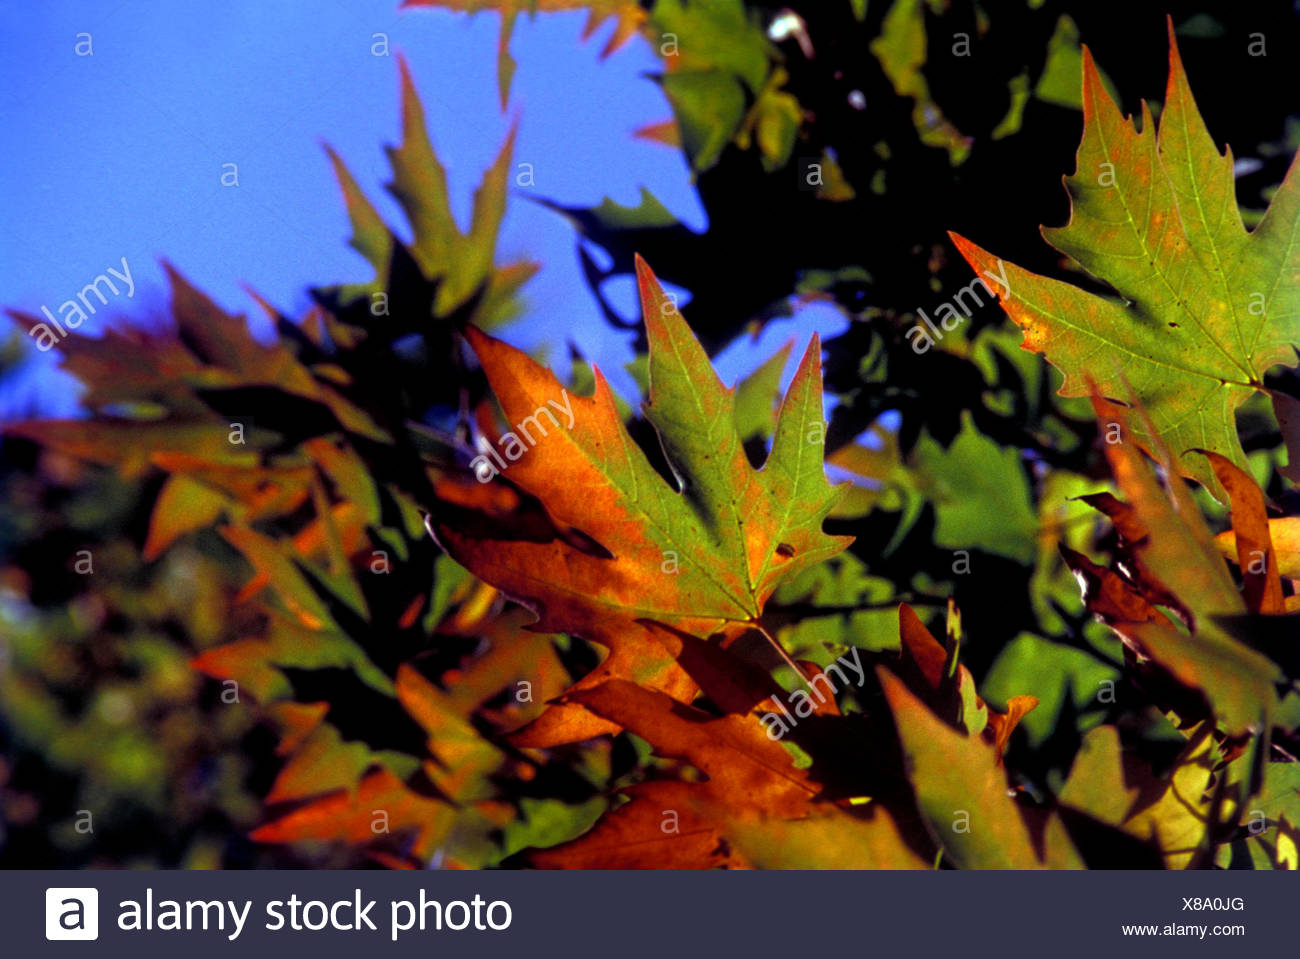 Chinar Leaves High Resolution Stock Photography and Images - Alamy